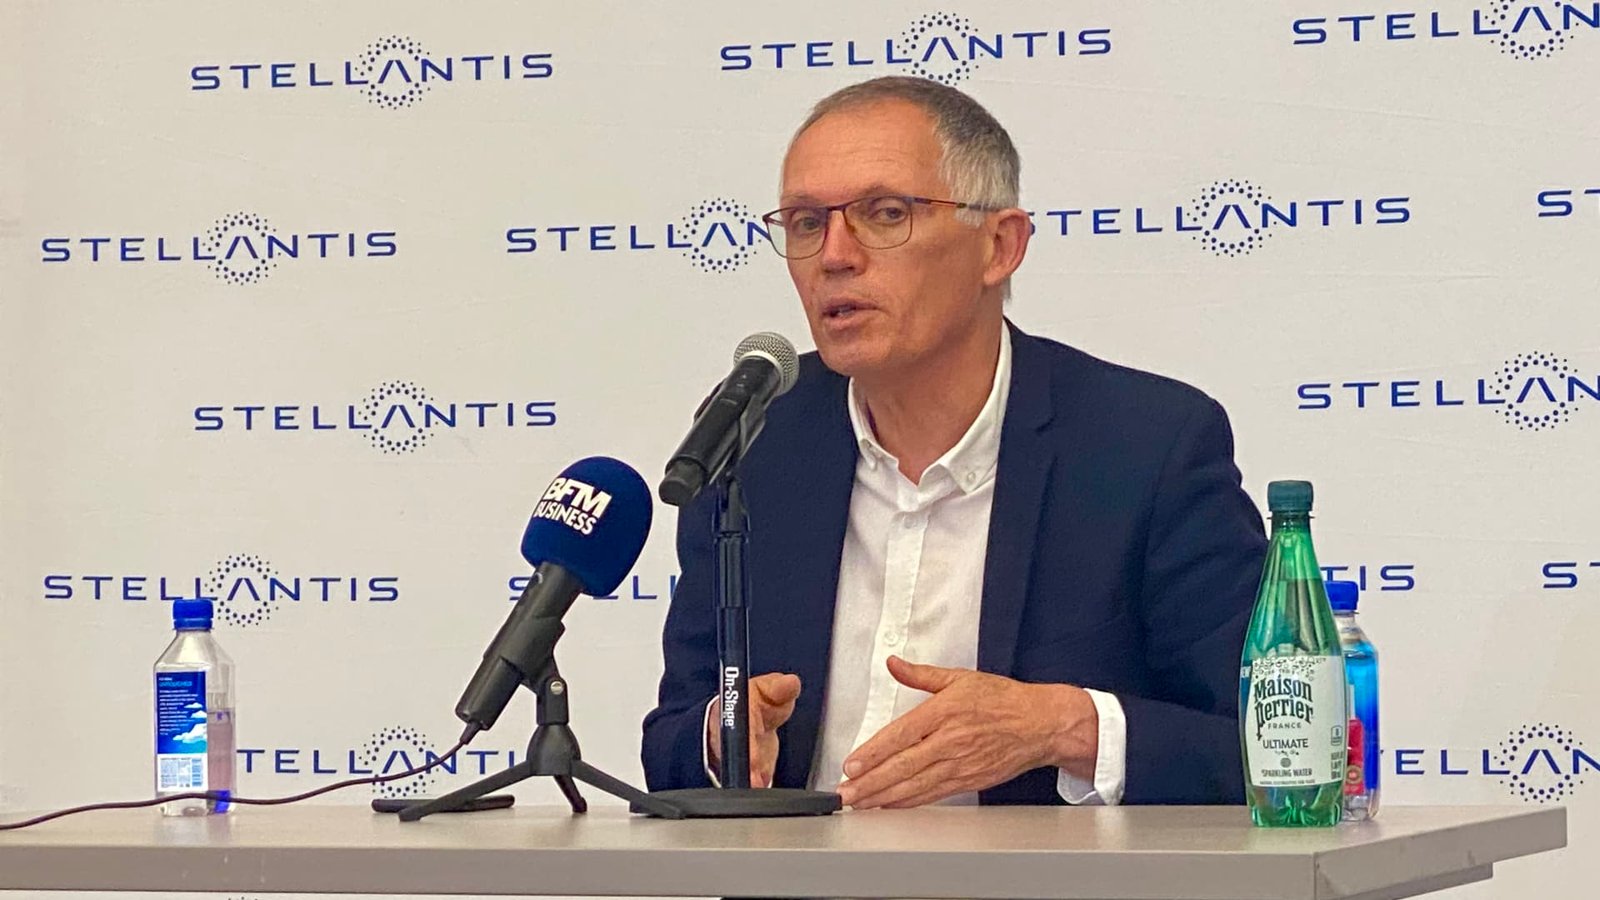 Stellantis has achieved $9 billion in value reductions from merger